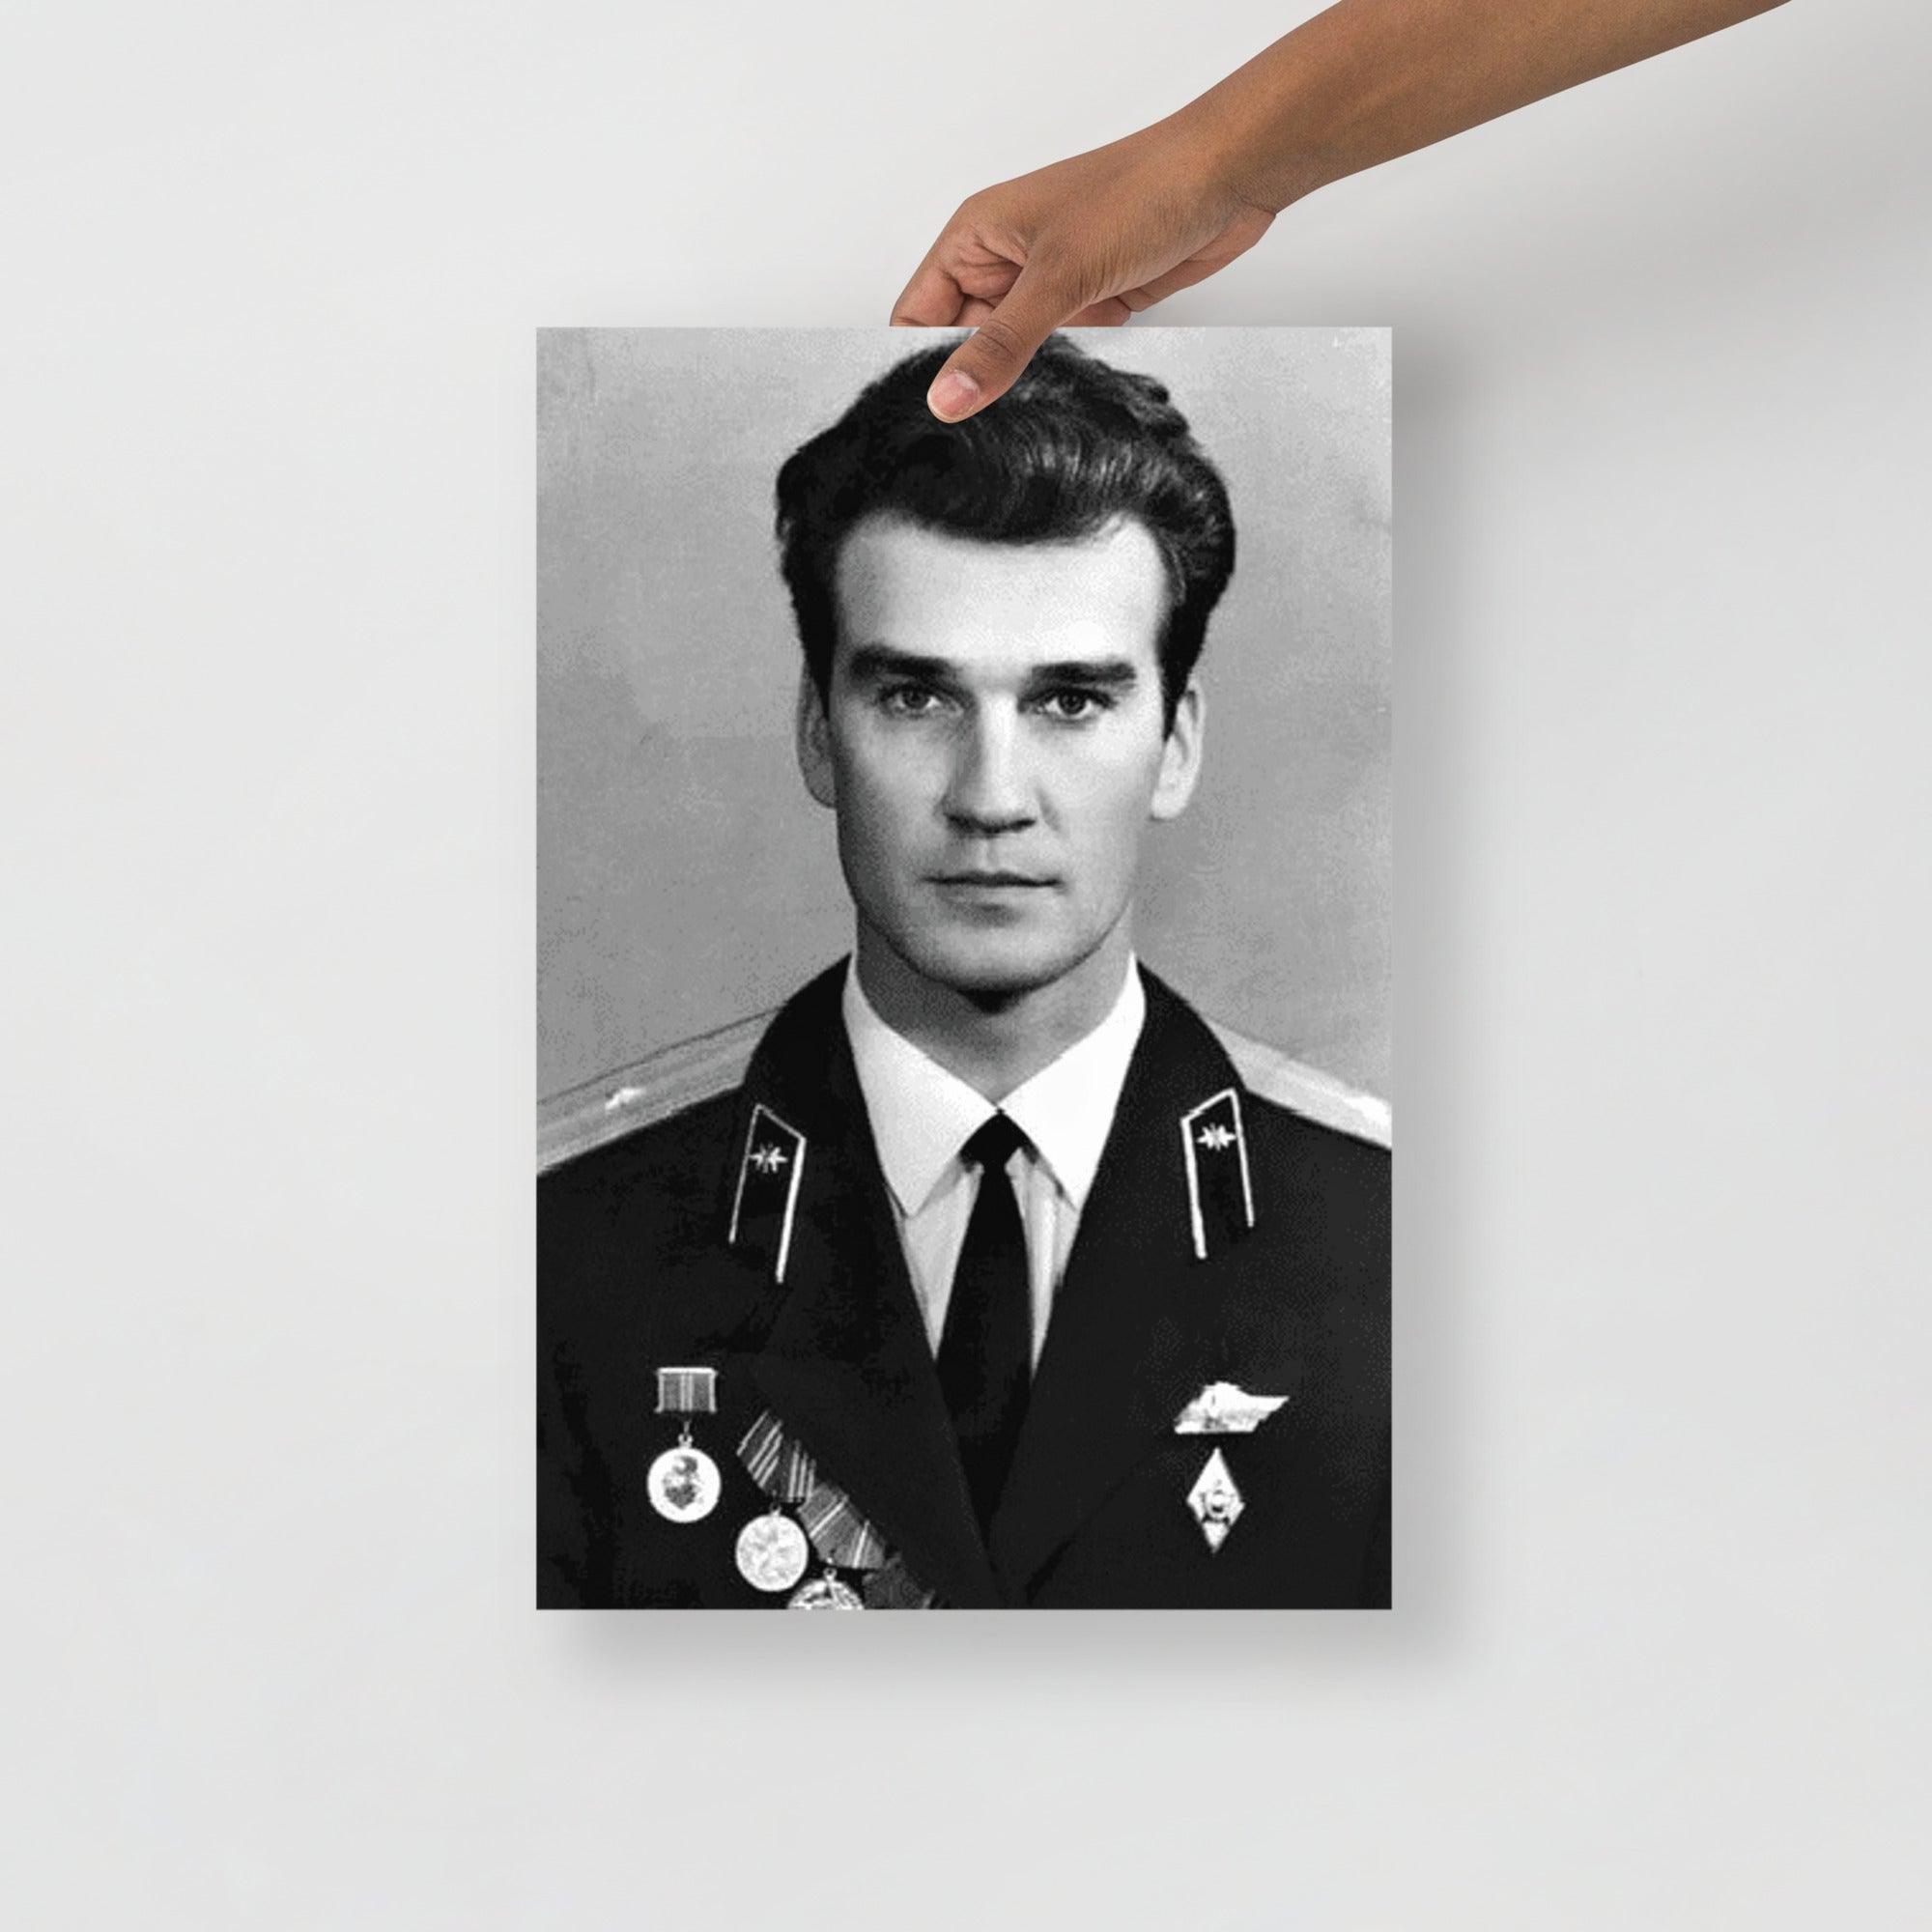 A Stanislav Petrov poster on a plain backdrop in size 12x18”.